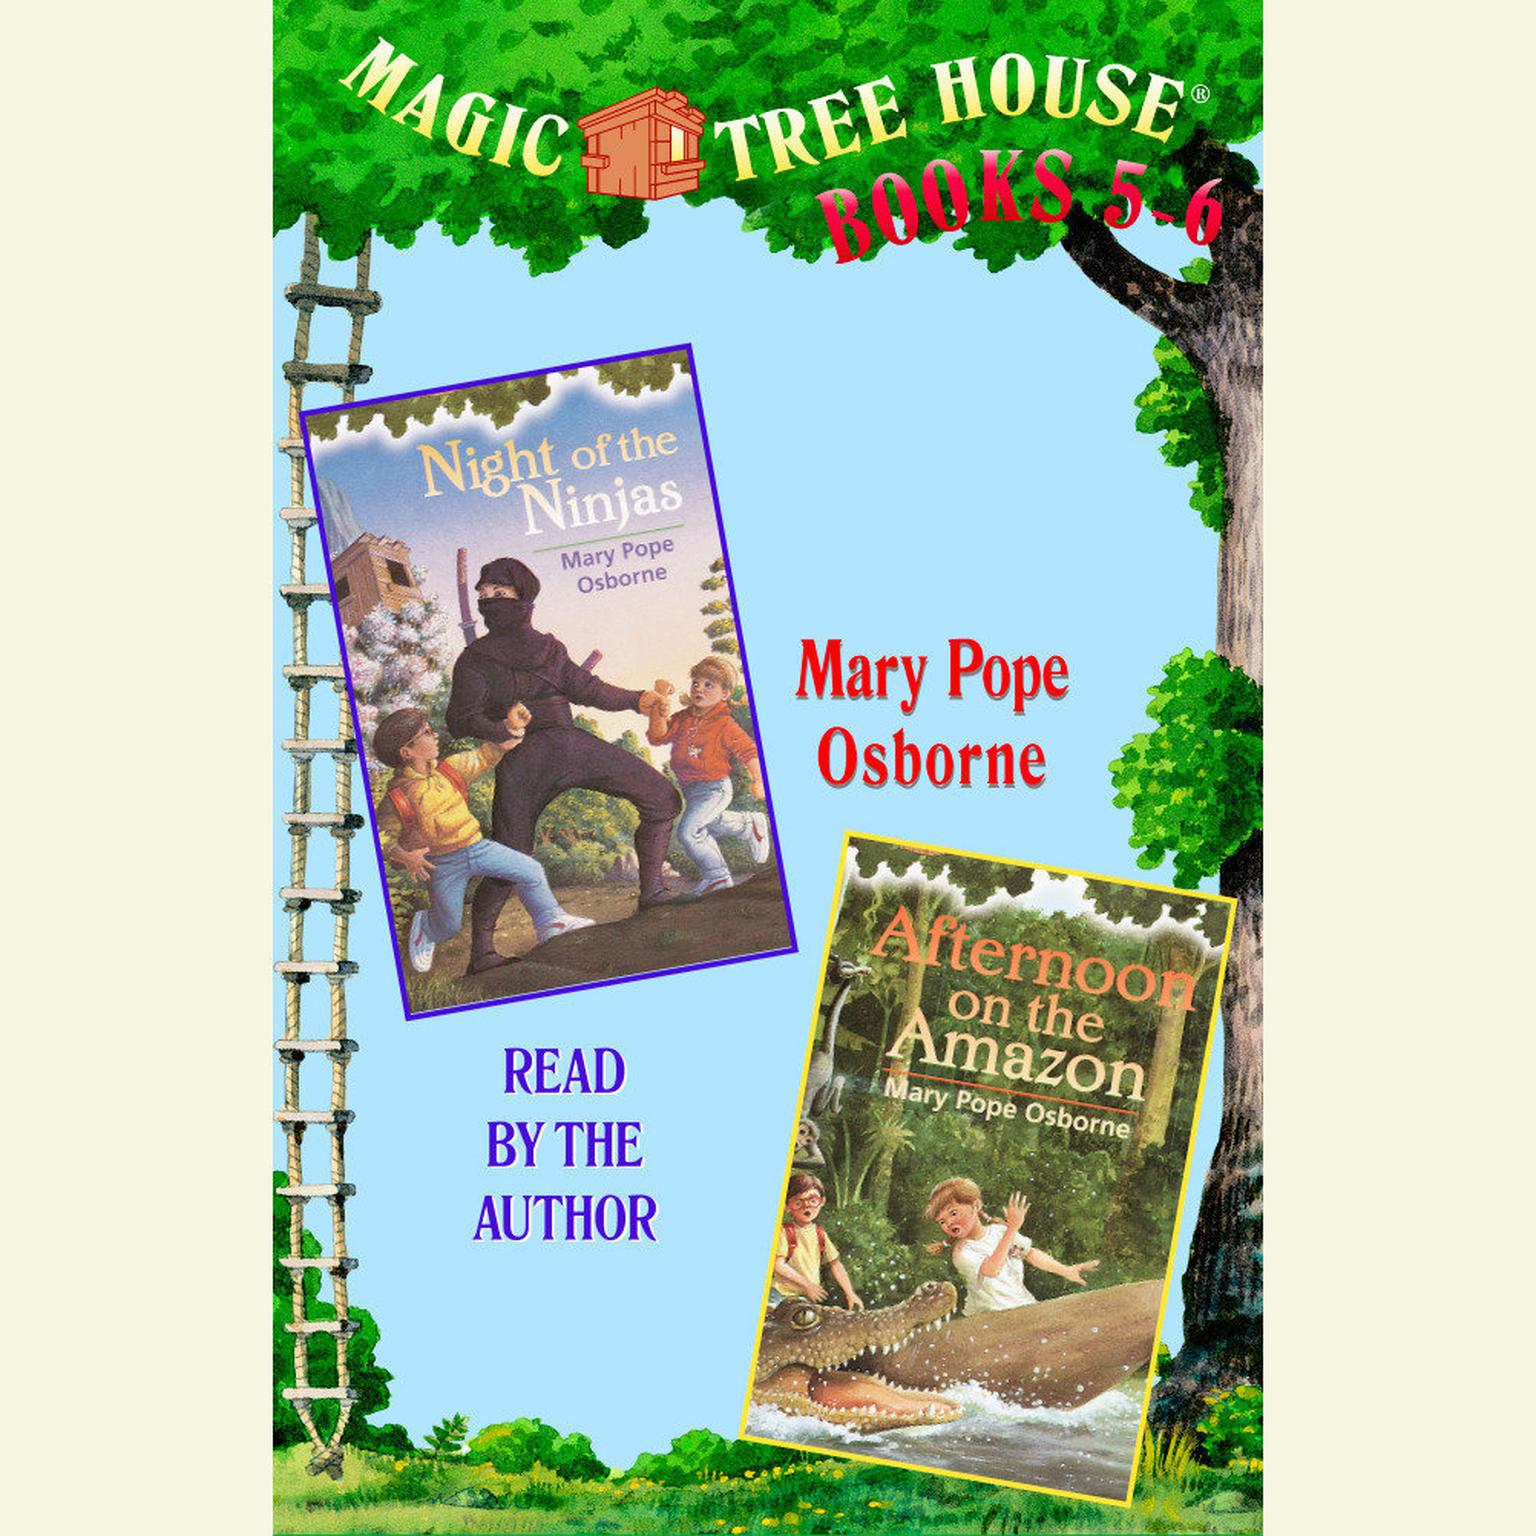 Magic Tree House: Books 5 and 6: Night of the Ninjas, Afternoon on the Amazon Audiobook, by Mary Pope Osborne